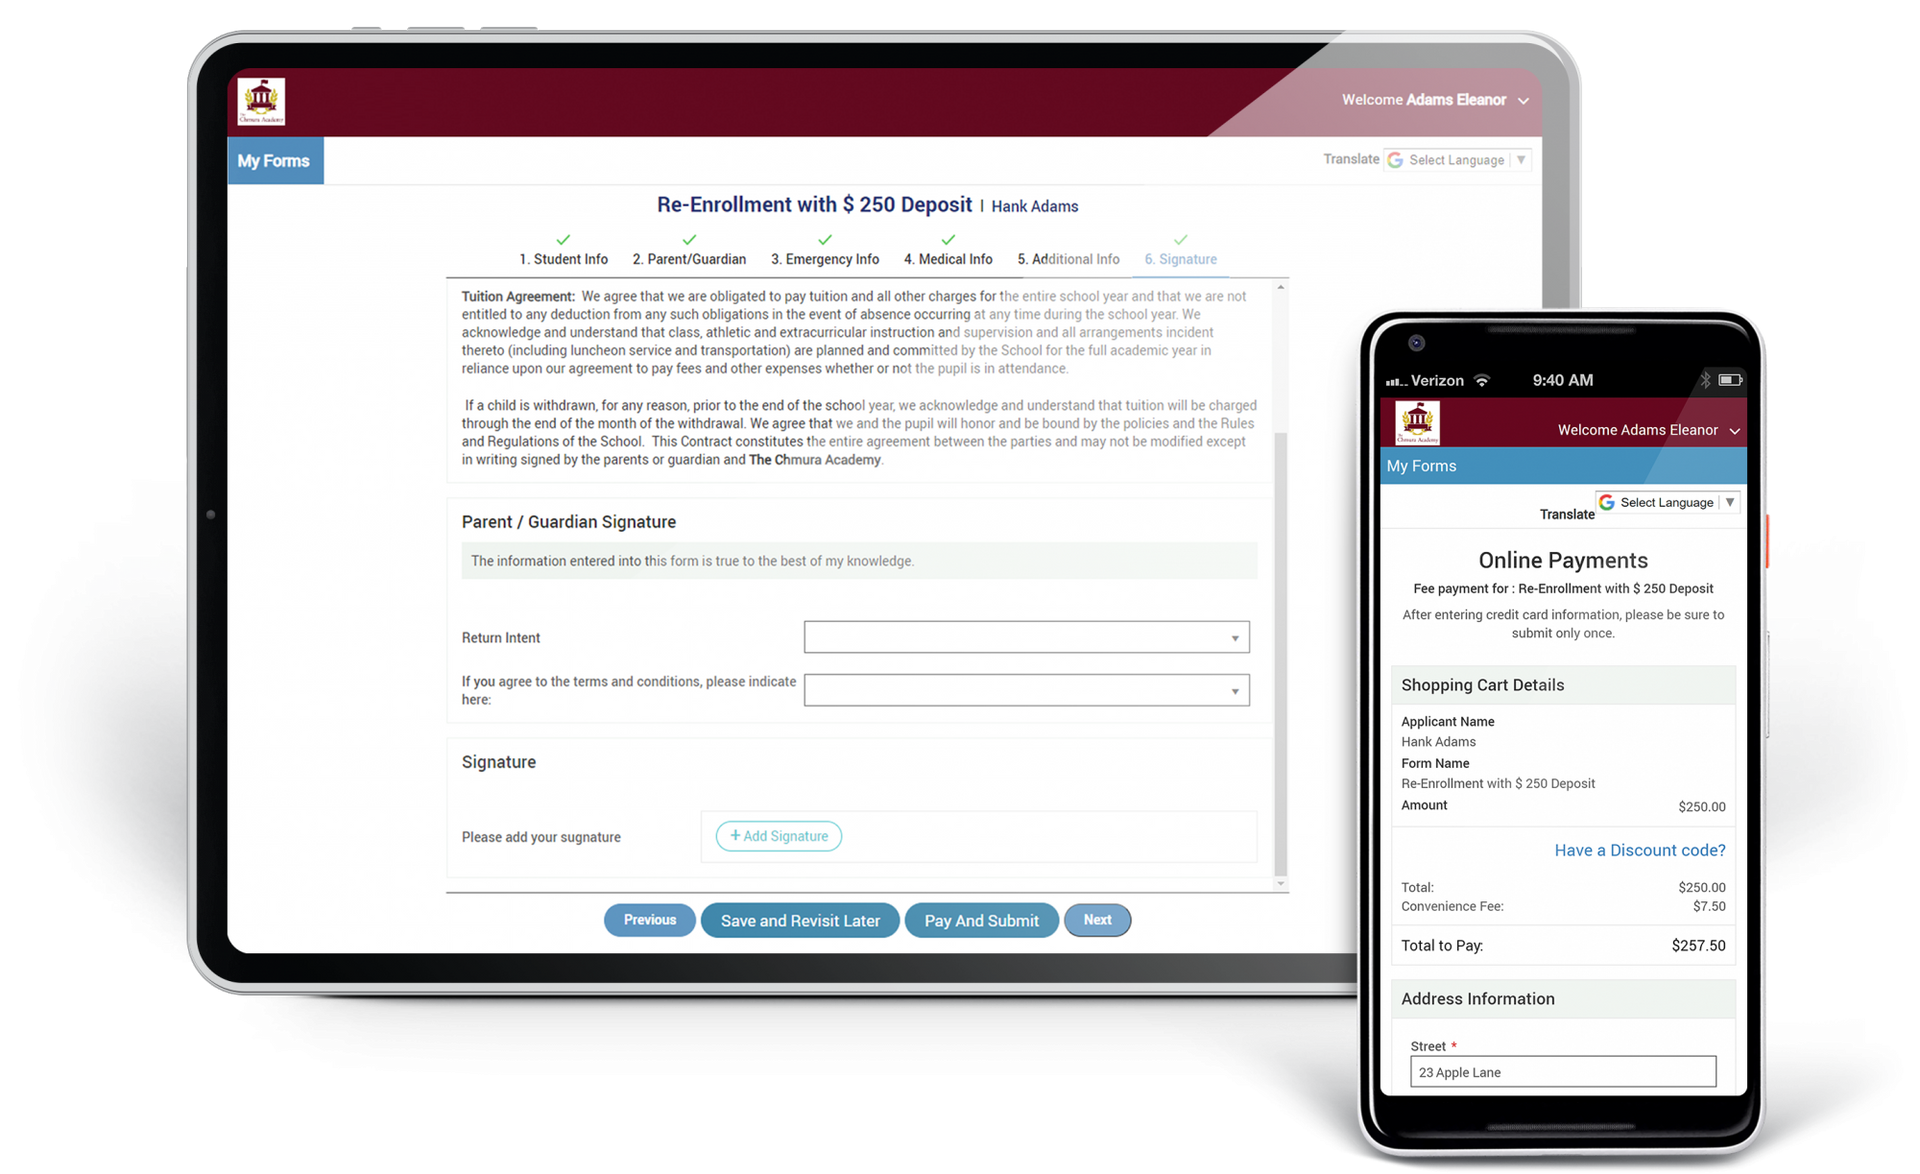 AdminPlus Online Forms on Tablet and Phone